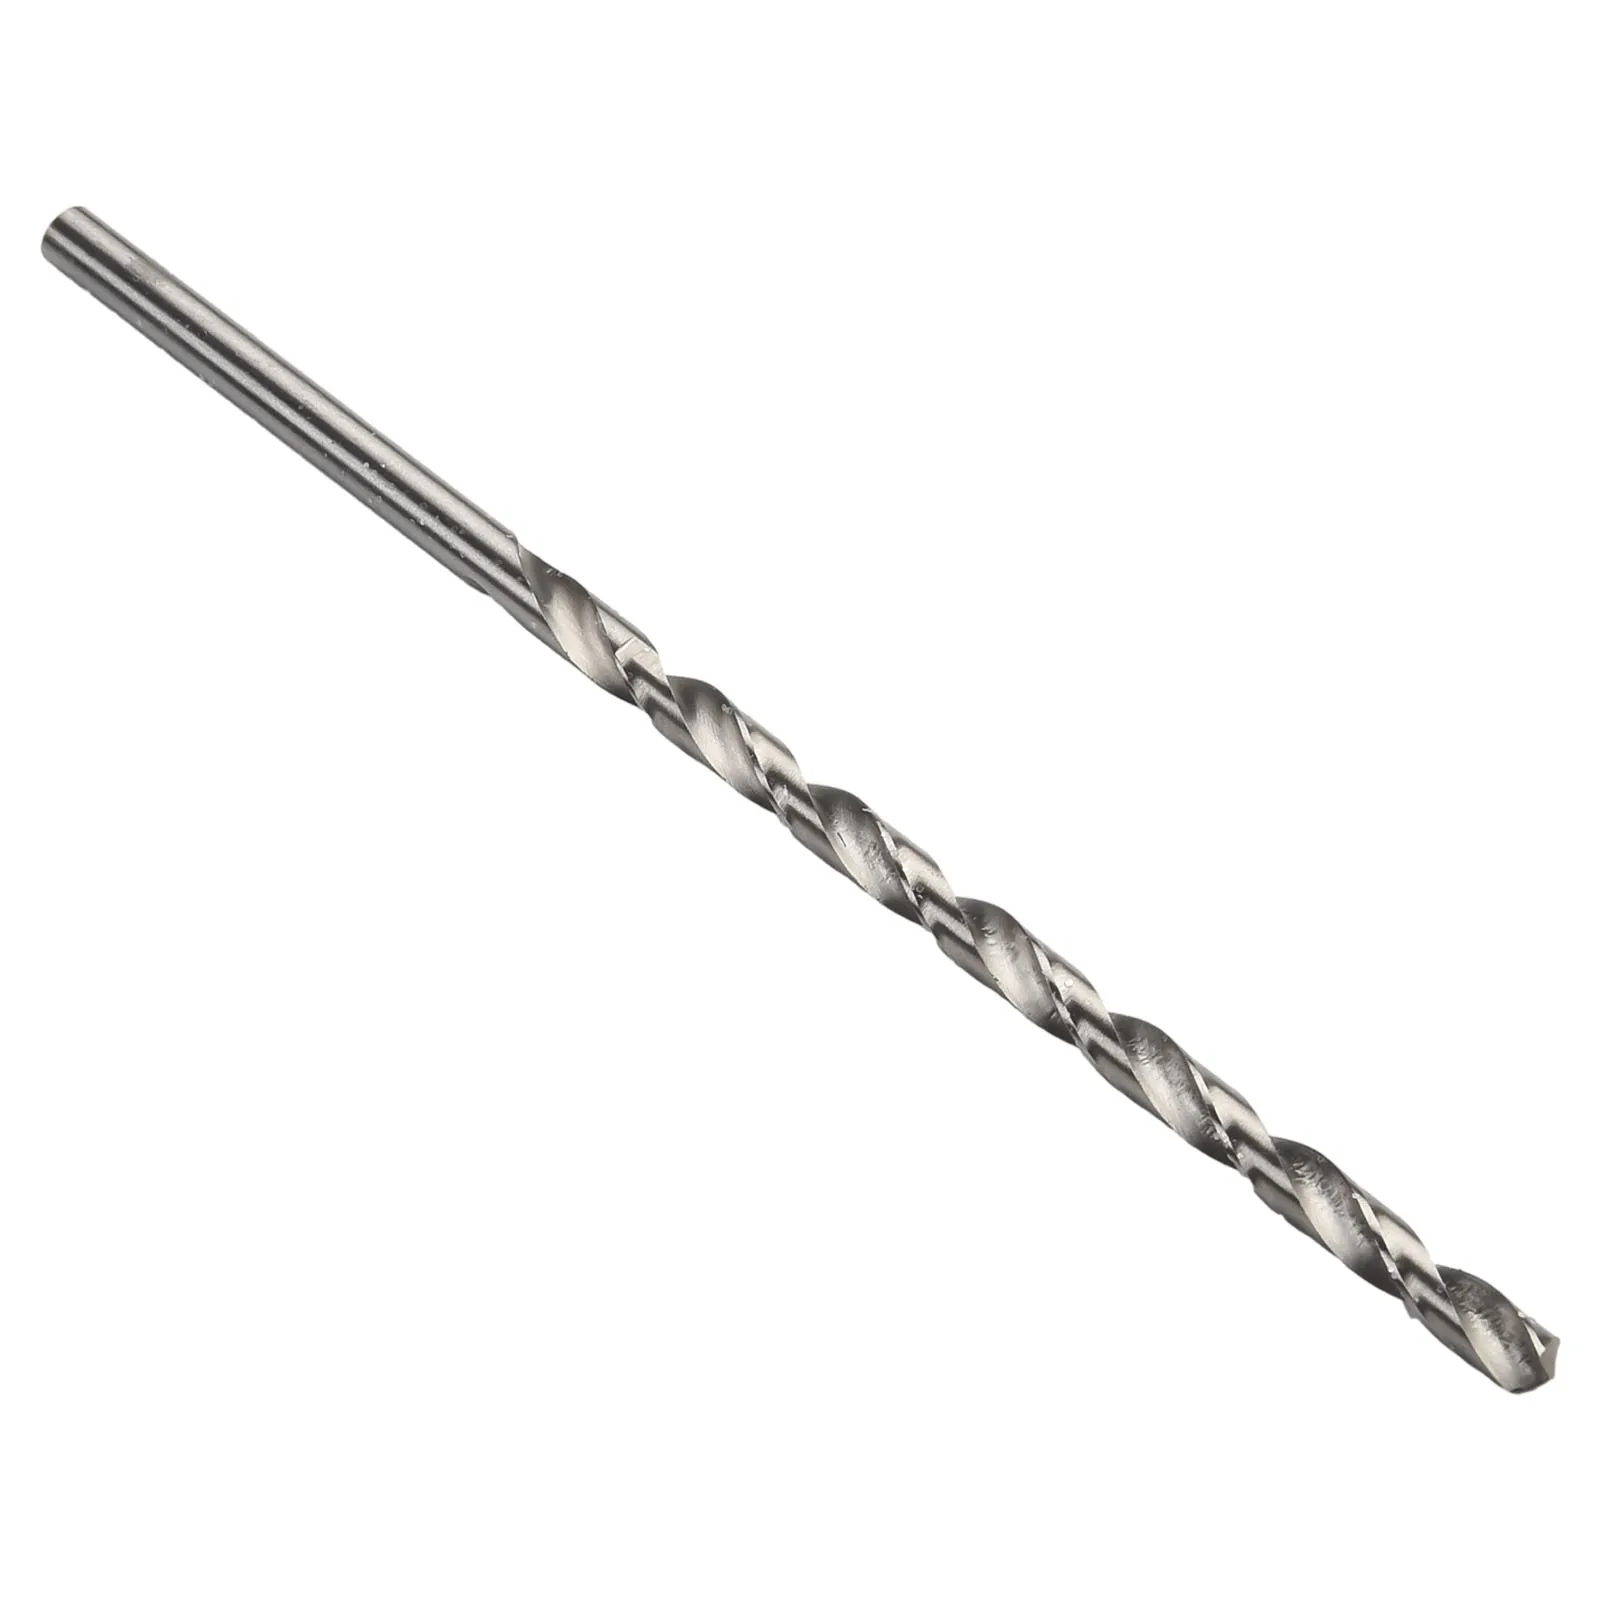 Drilling Machines Drill Bit Electric Drill 4mm Accessories Extra Long High Speed Steel Parts Silver 10PCS 150mm